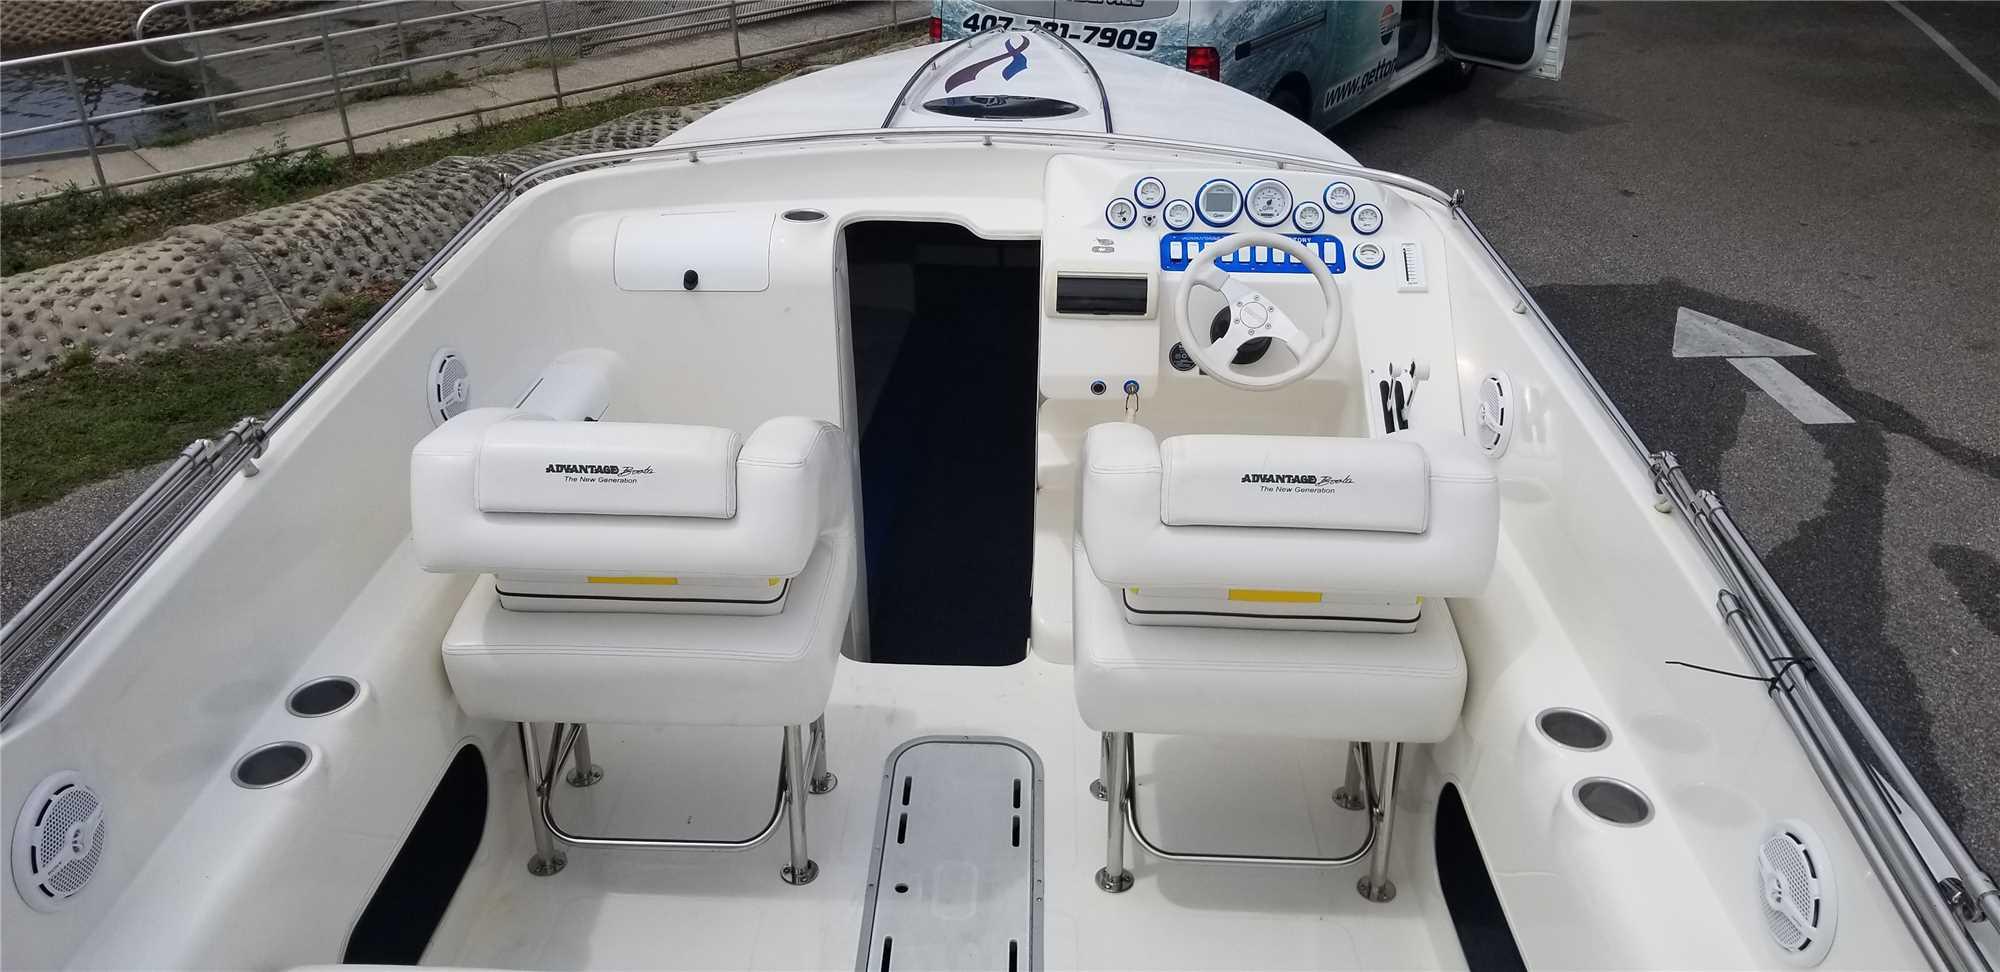 2002 Advantage Model: 30 Victory. VIN:AVI30942G102. Hours: 600. This boat is located in Clermont, FL